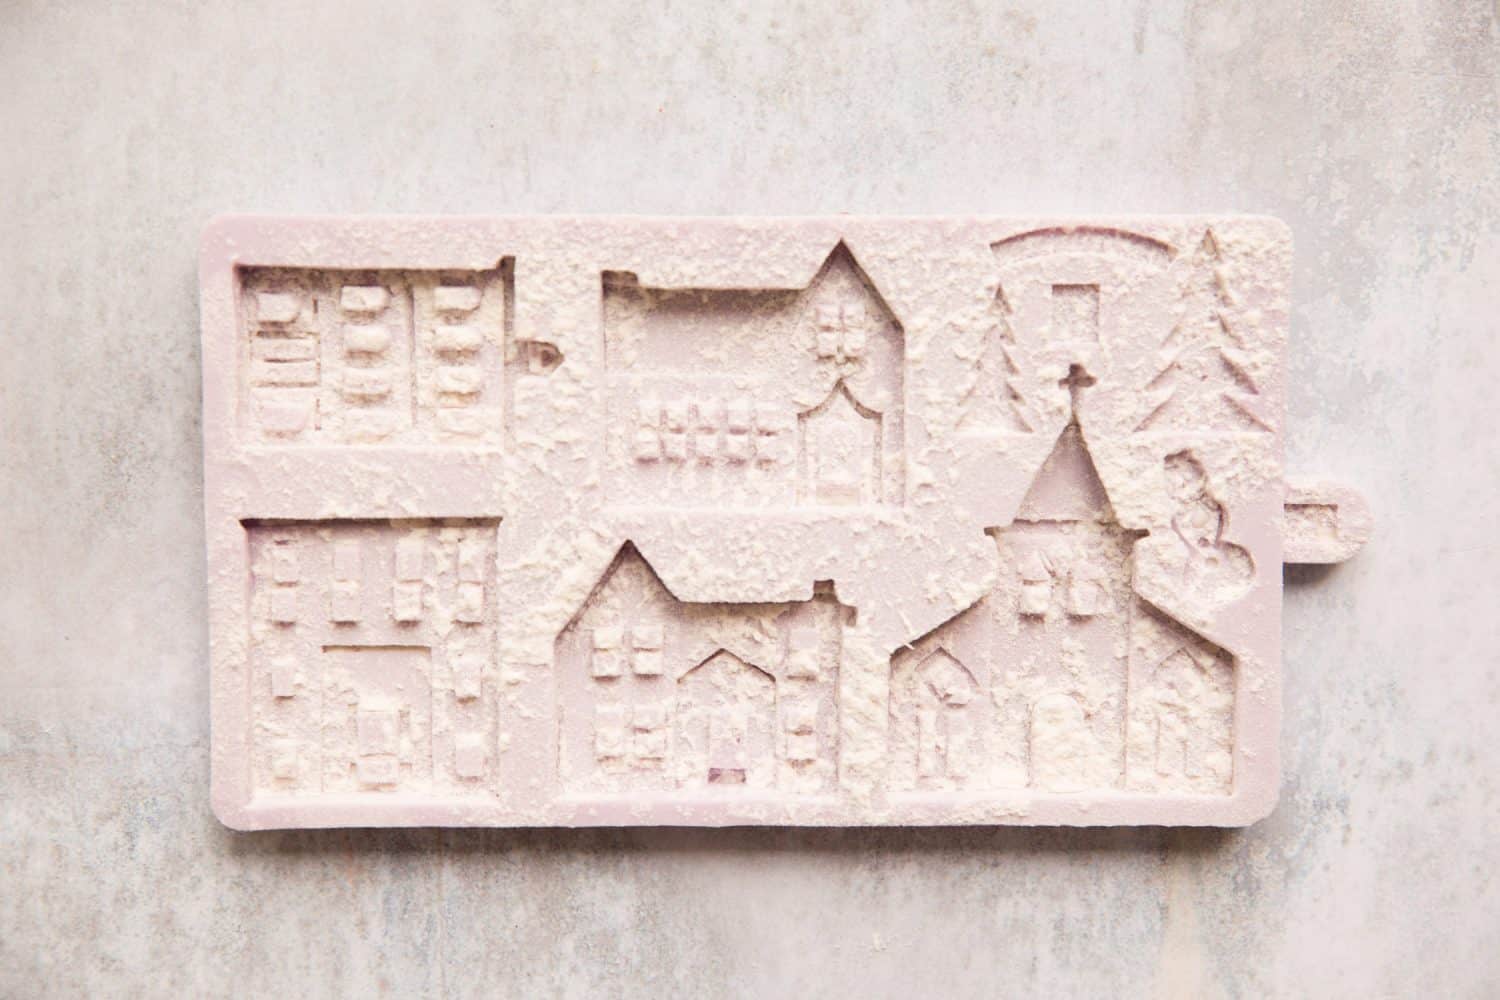 A gingerbread house mould that has been dusted with flour.